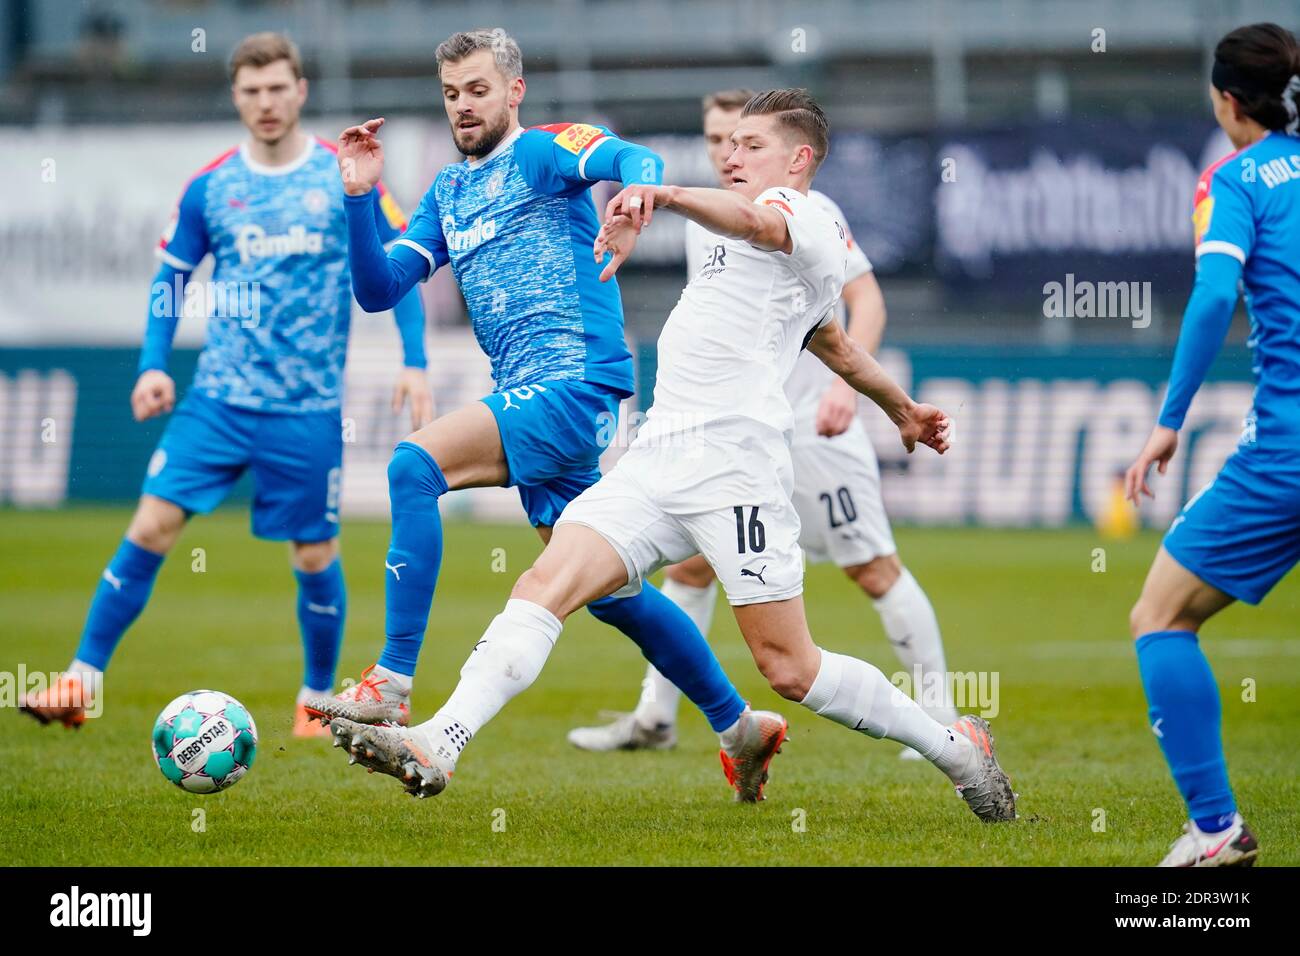 Sandhausen, Germany. 20th Dec, 2020. Football: 2. Bundesliga, SV Sandhausen - Holstein Kiel, Matchday 13 at BWT-Stadion am Hardtwald. Kiel's Stefan Thesker (l) and Sandhausen's Kevin Behrens fight for the ball. Credit: Uwe Anspach/dpa - IMPORTANT NOTE: In accordance with the regulations of the DFL Deutsche Fußball Liga and/or the DFB Deutscher Fußball-Bund, it is prohibited to use or have used photographs taken in the stadium and/or of the match in the form of sequence pictures and/or video-like photo series./dpa/Alamy Live News Stock Photo